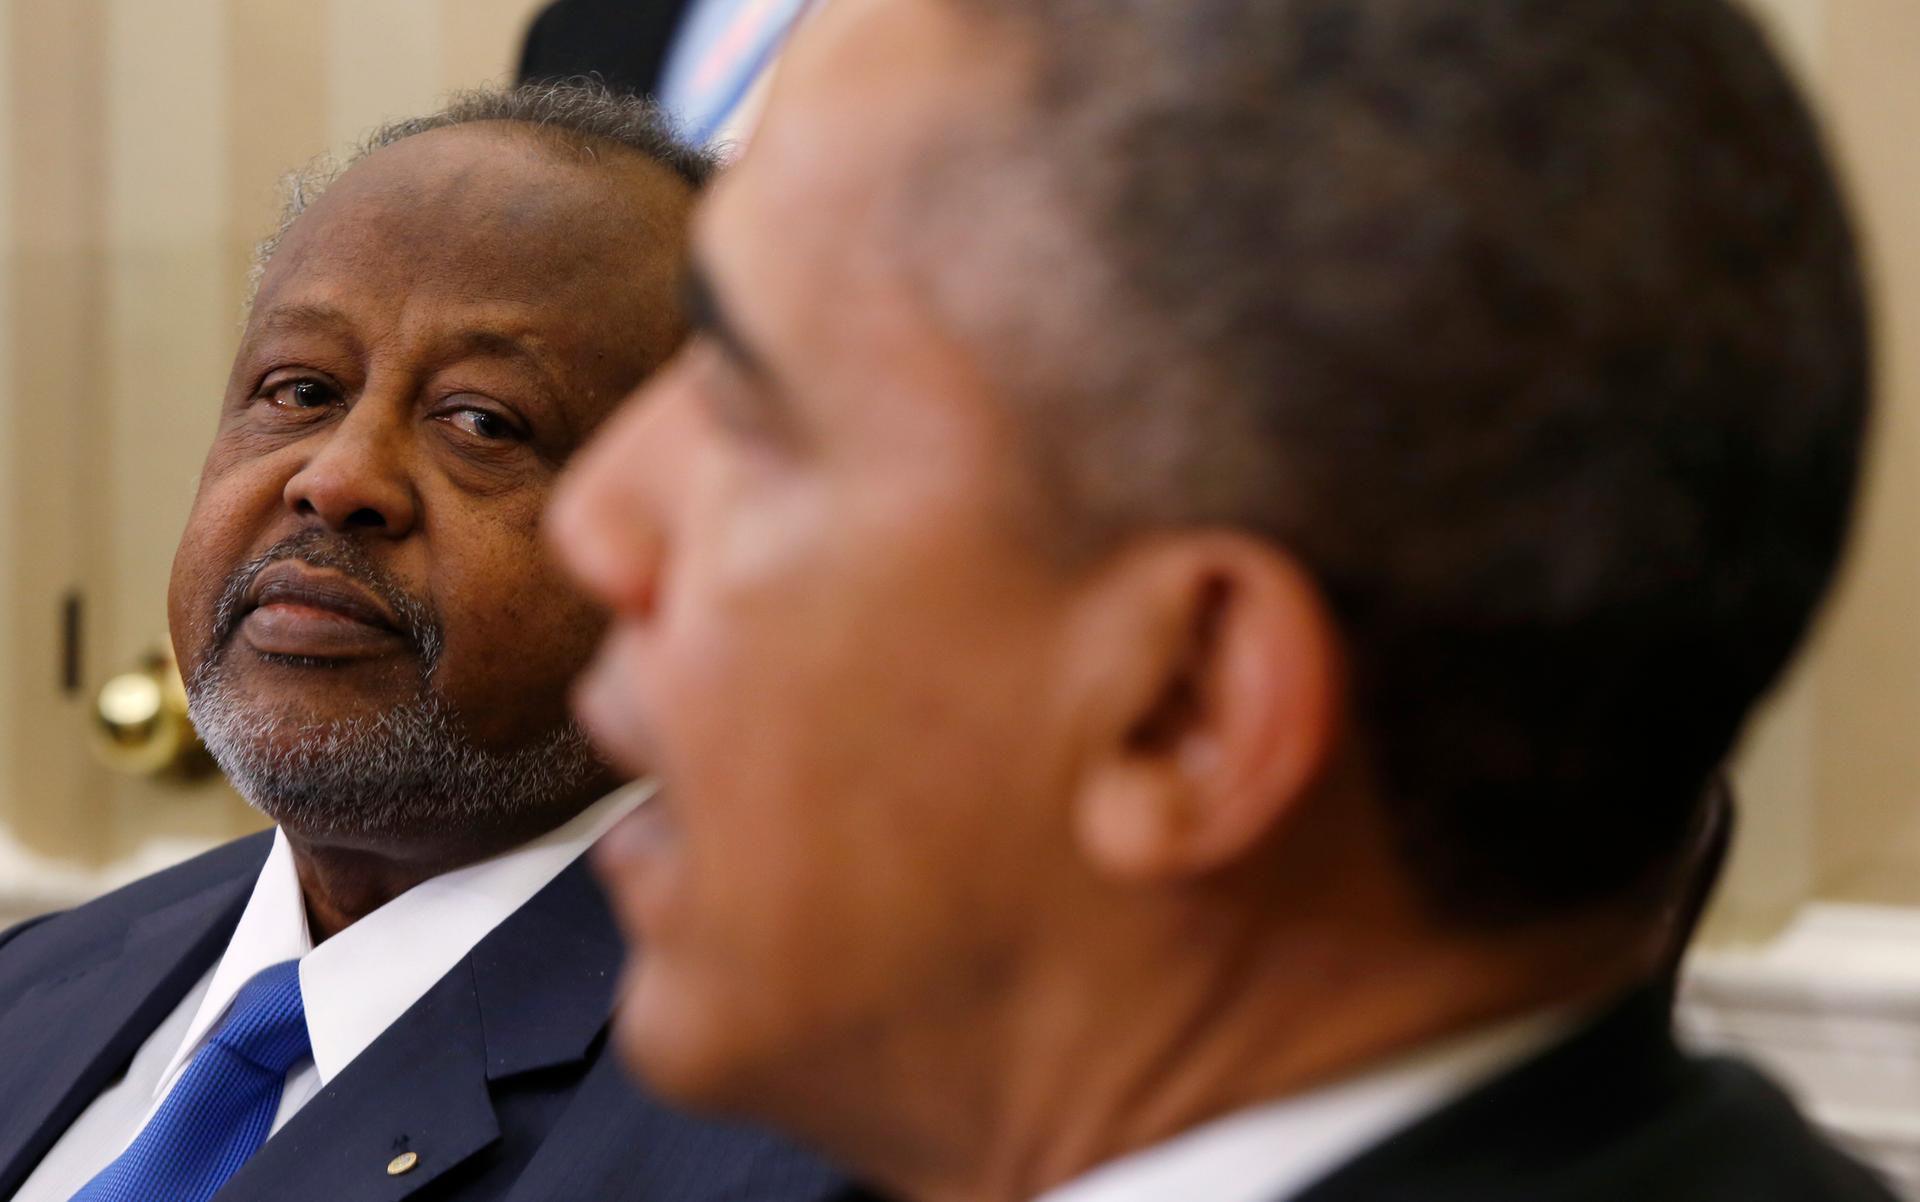 U.S. President Barack Obama meets with President Ismaïl Omar Guelleh of Djibouti on May 5, 2014. Some Djiboutians say American ties to their country are holding back democratization.